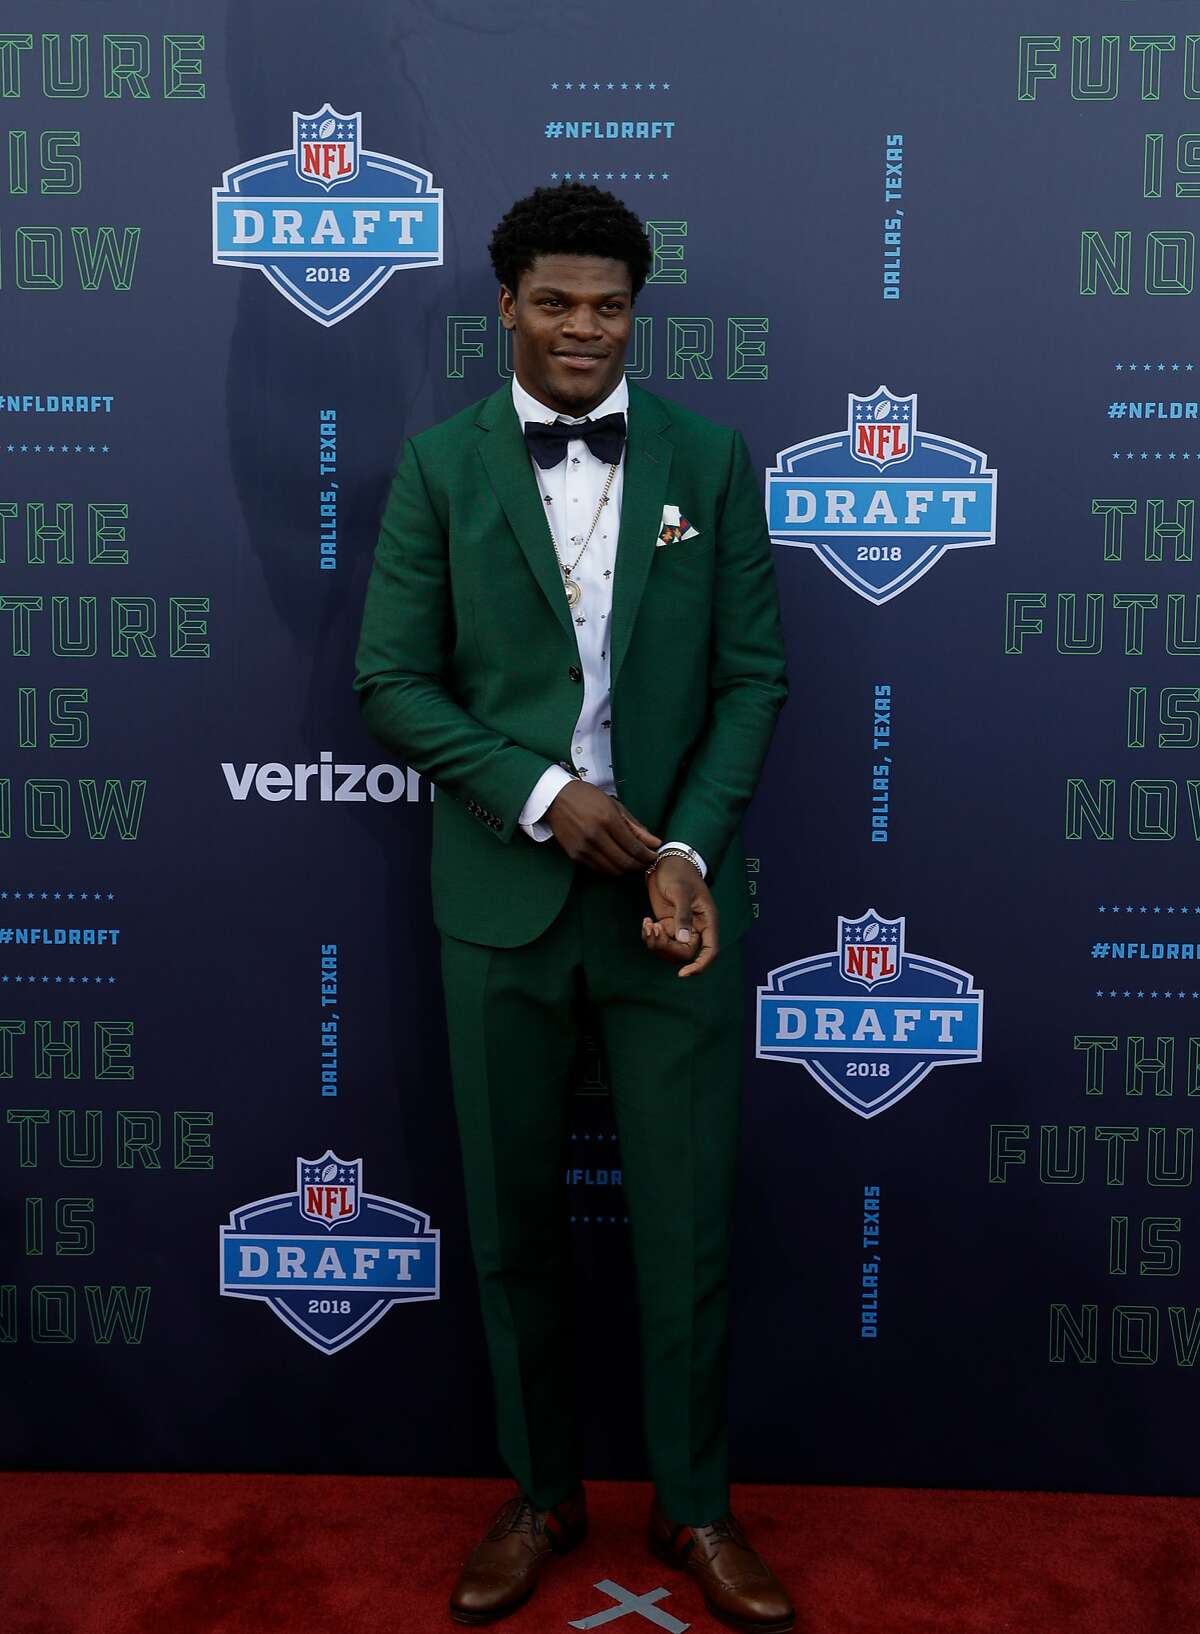 The long wait is over: Lamar Jackson chosen with last pick of 1st round